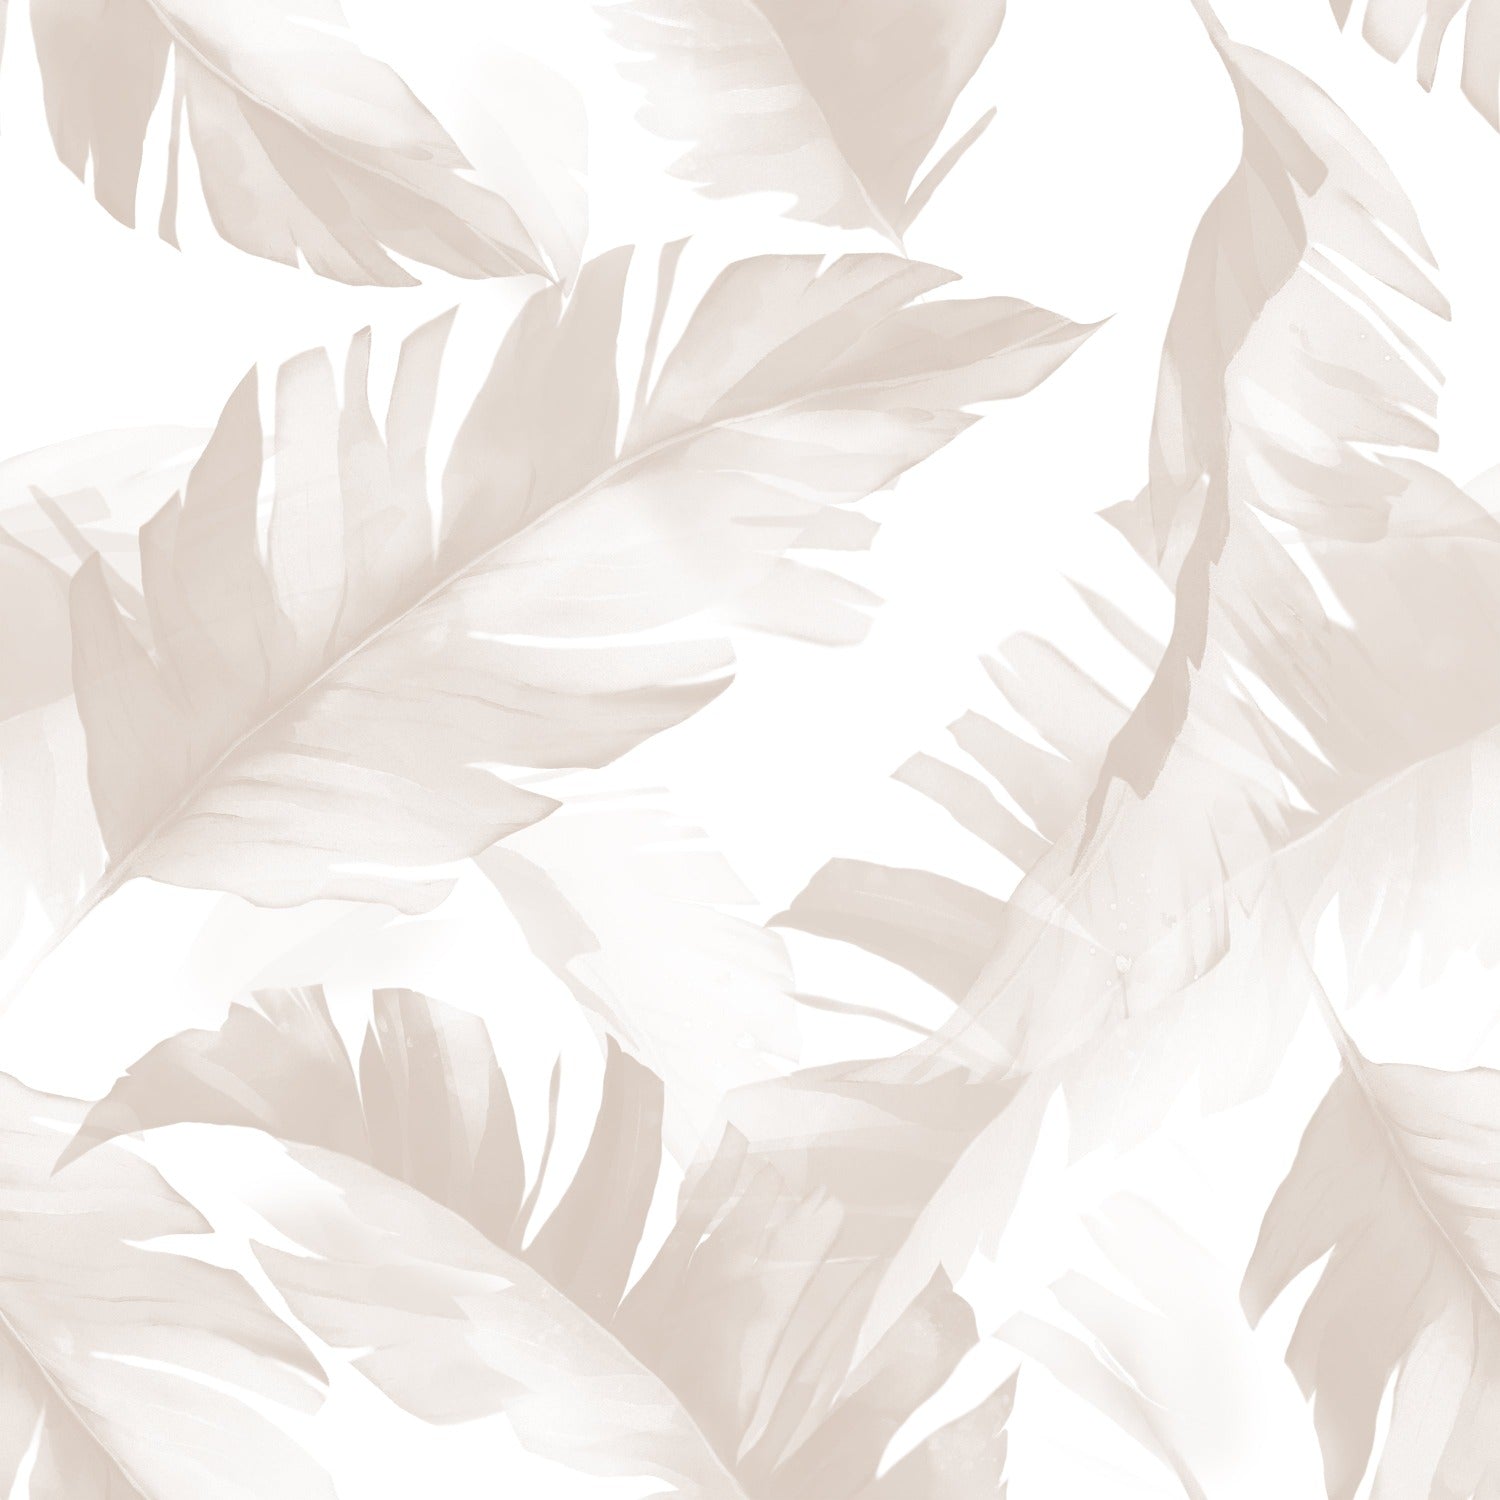 A delicate and soft pattern of tropical leaves in muted beige tones spread across a clean white background. The subtle leaf design suggests a serene and natural ambience, suitable for a peaceful and minimalist decor theme.